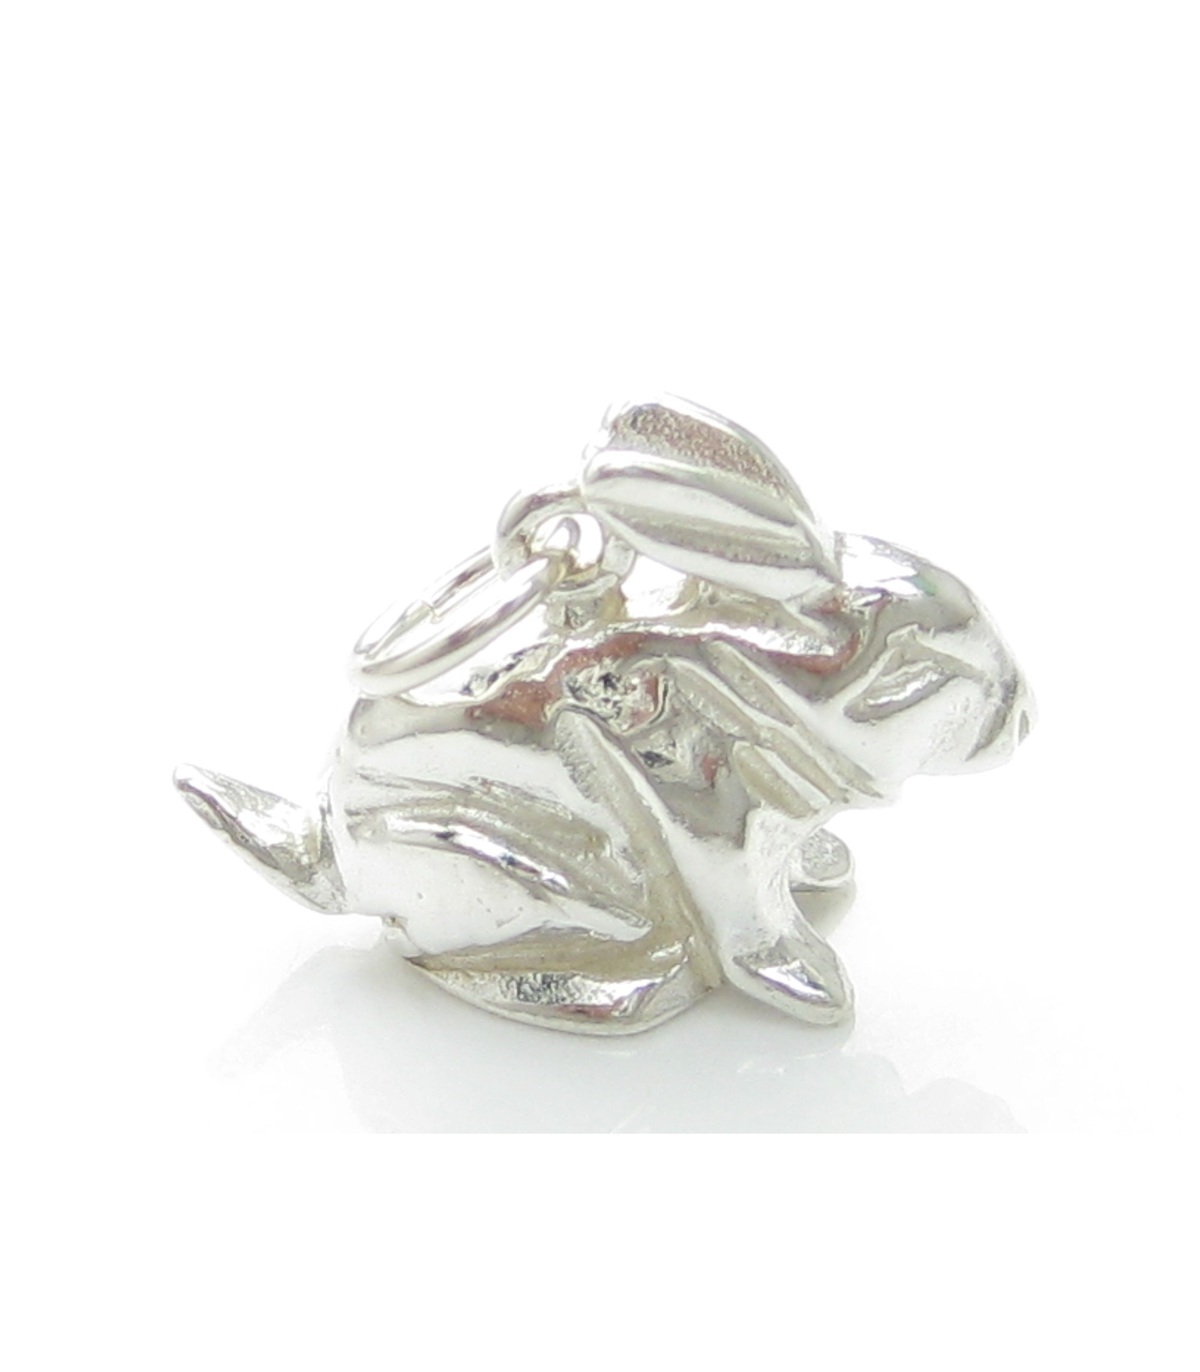 Kaninchen Sterling Silber Charm .925 x 1 Kaninchen Hase Hasen Charms